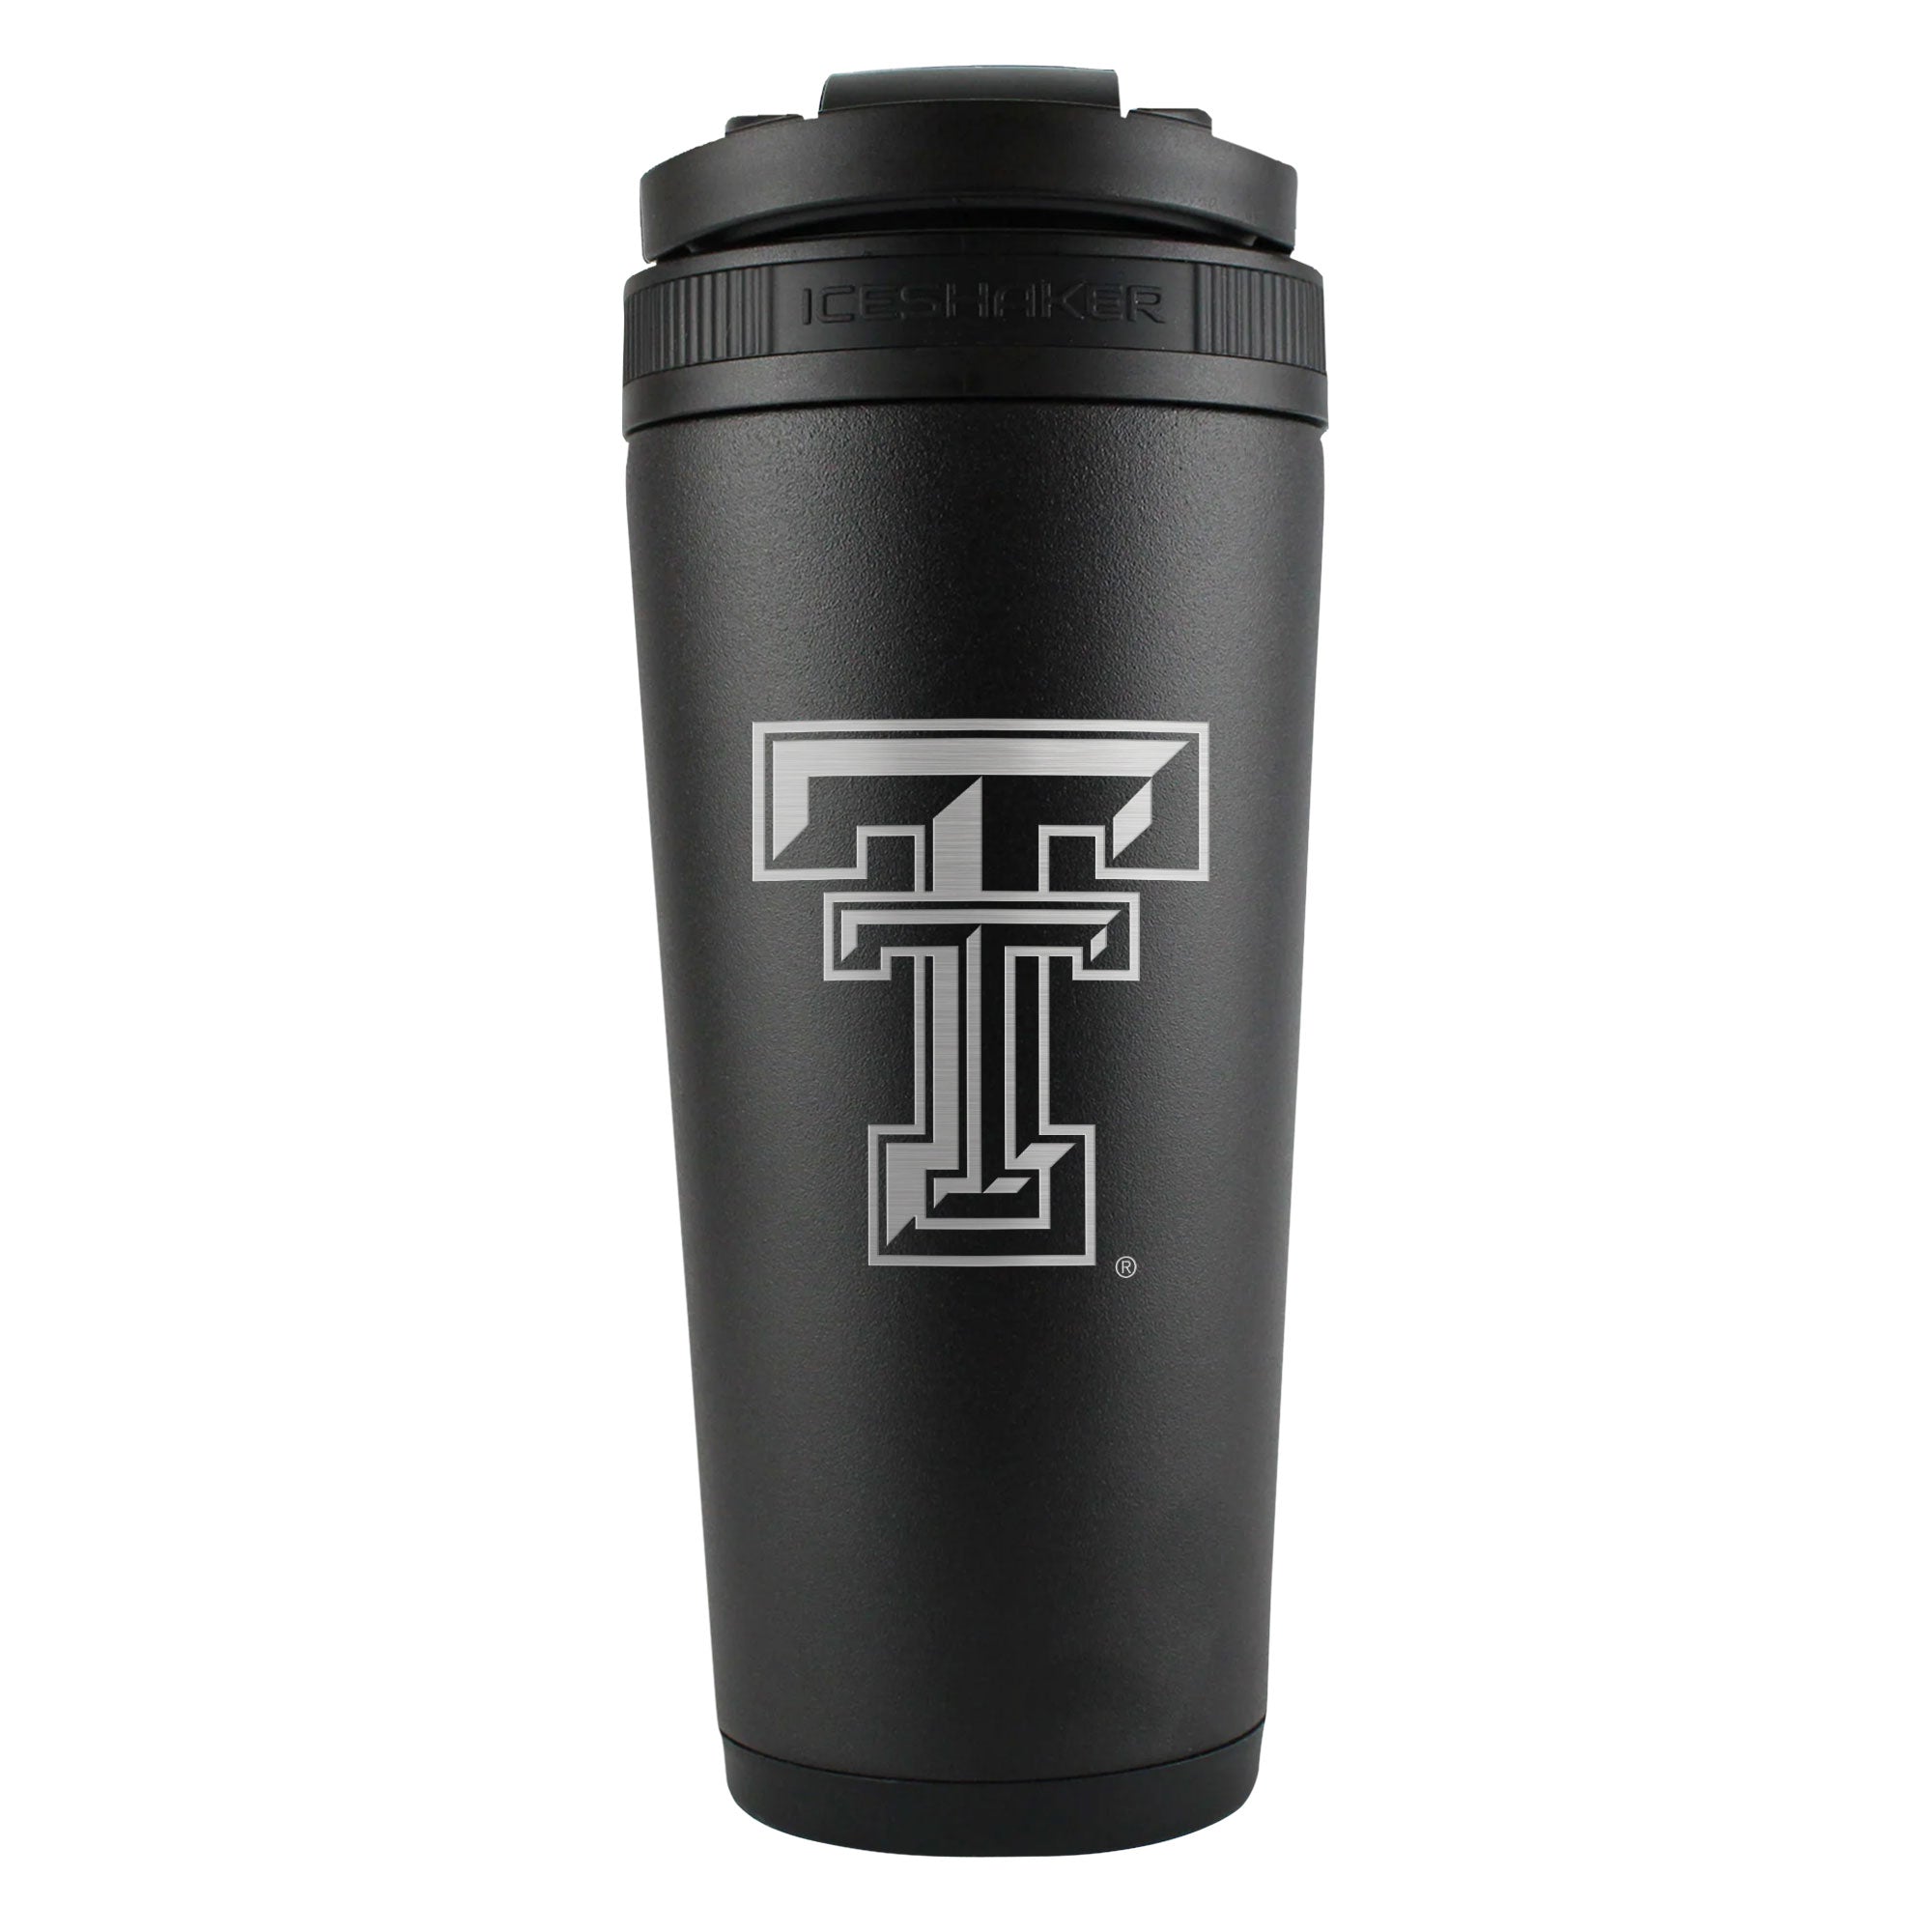 Officially Licensed Texas Tech University 26oz Ice Shaker